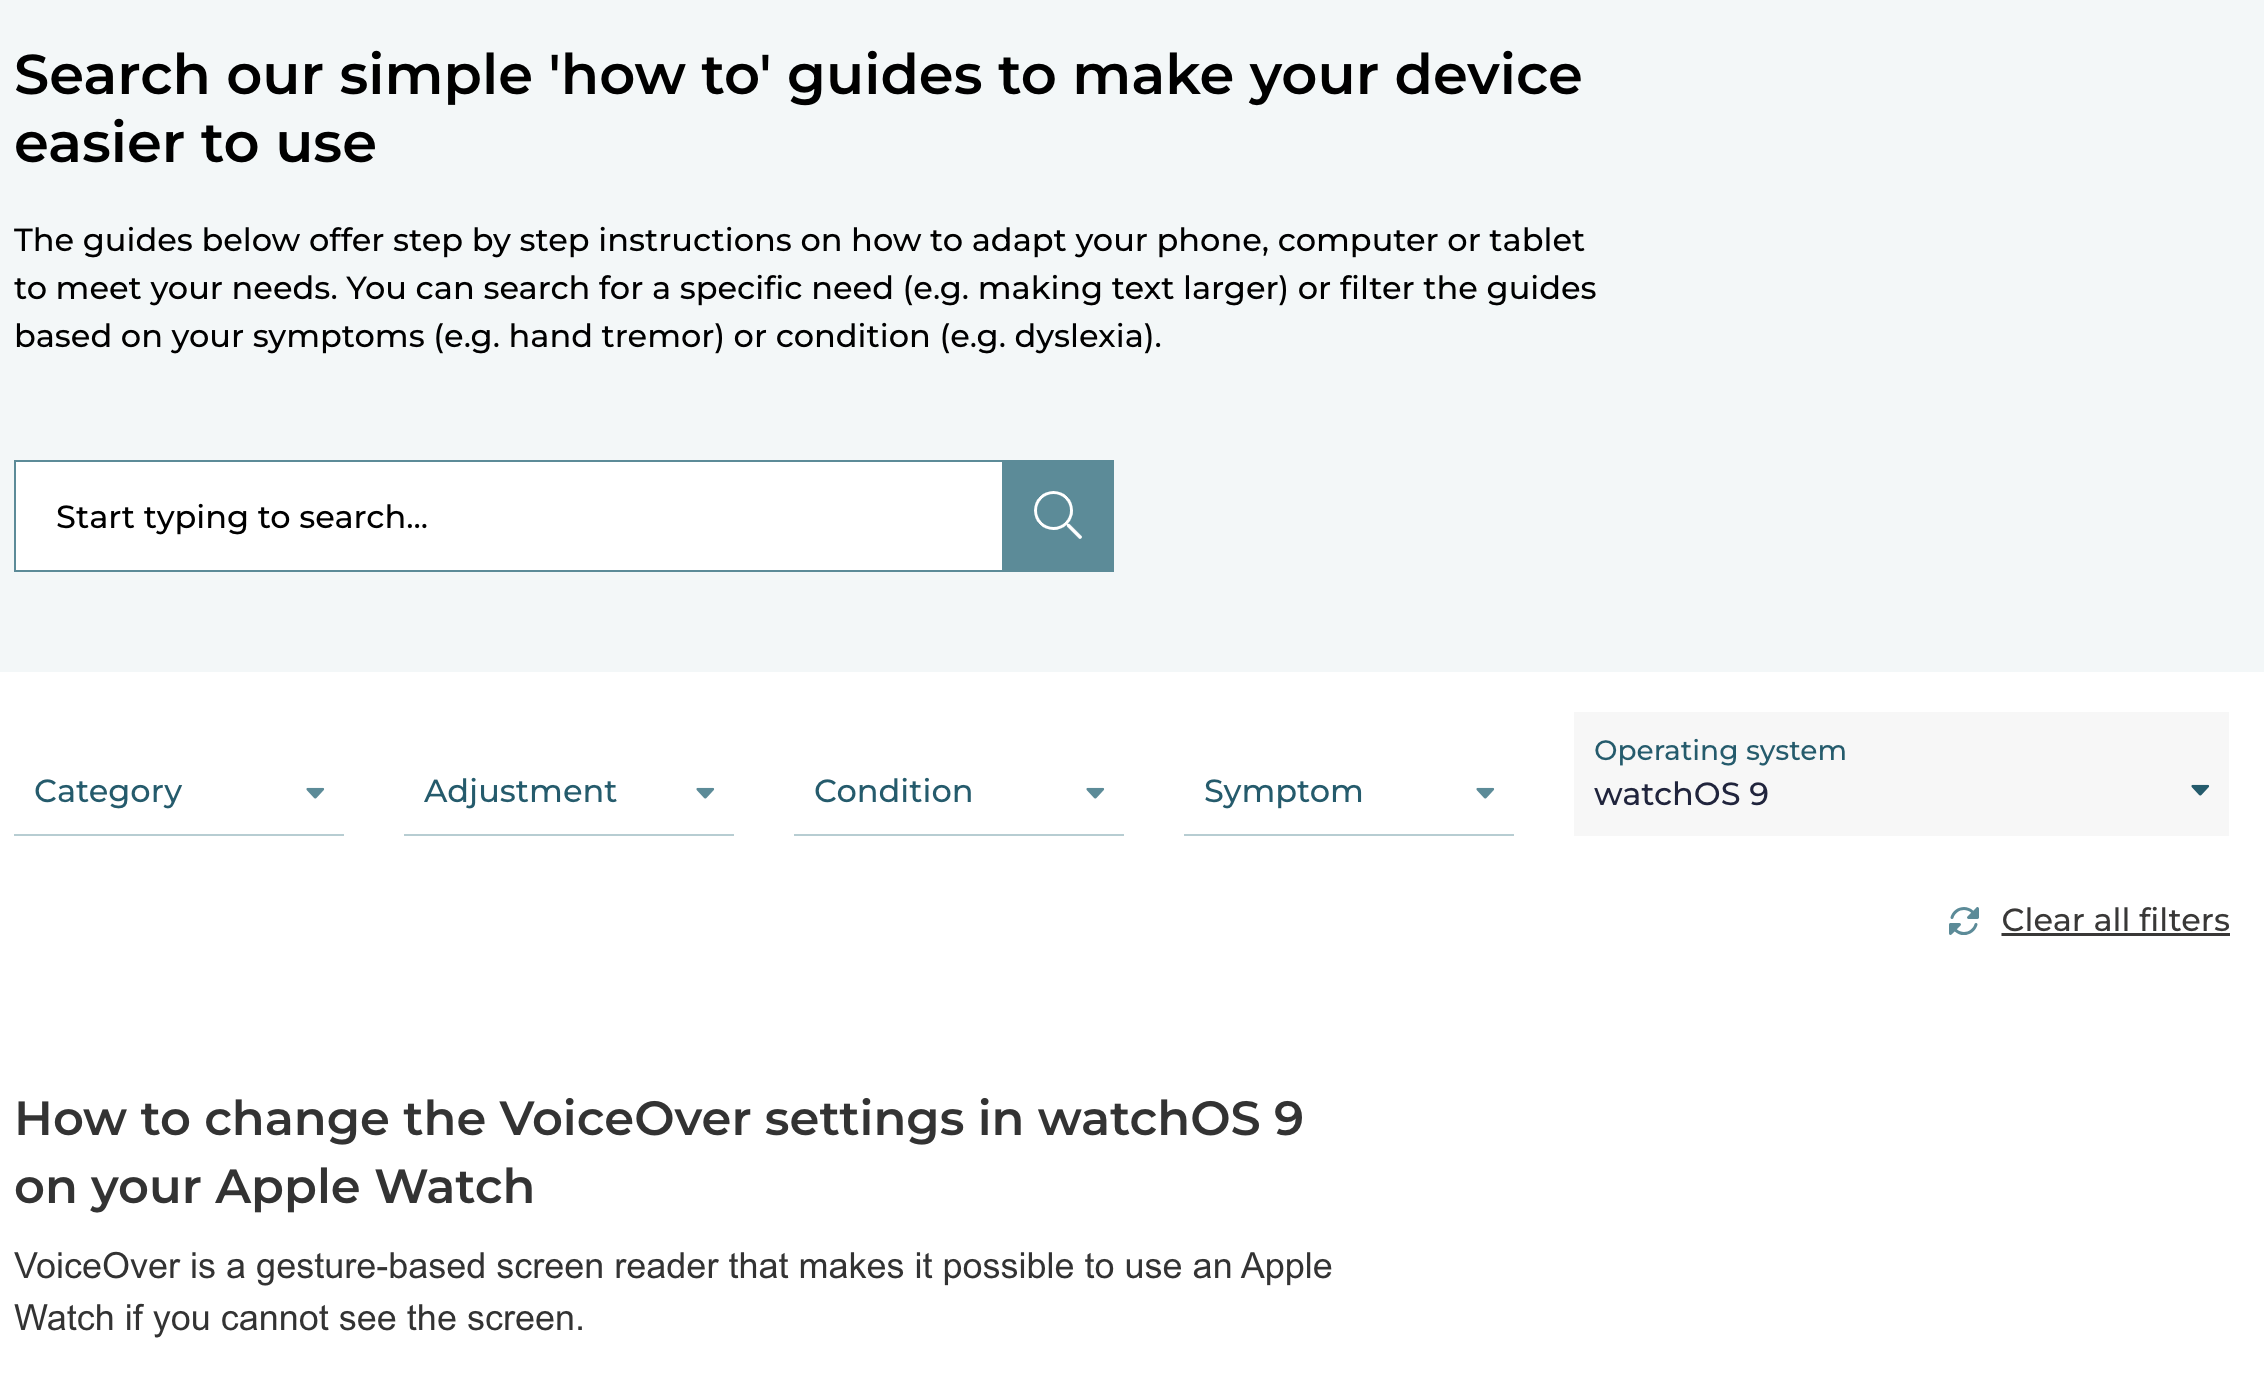 Screenshot of the My Computer My Way homepage with 'watchOS 9' showing in 'Operating system' field, alongside other categories: Symptom, Condition, Adjustment'.